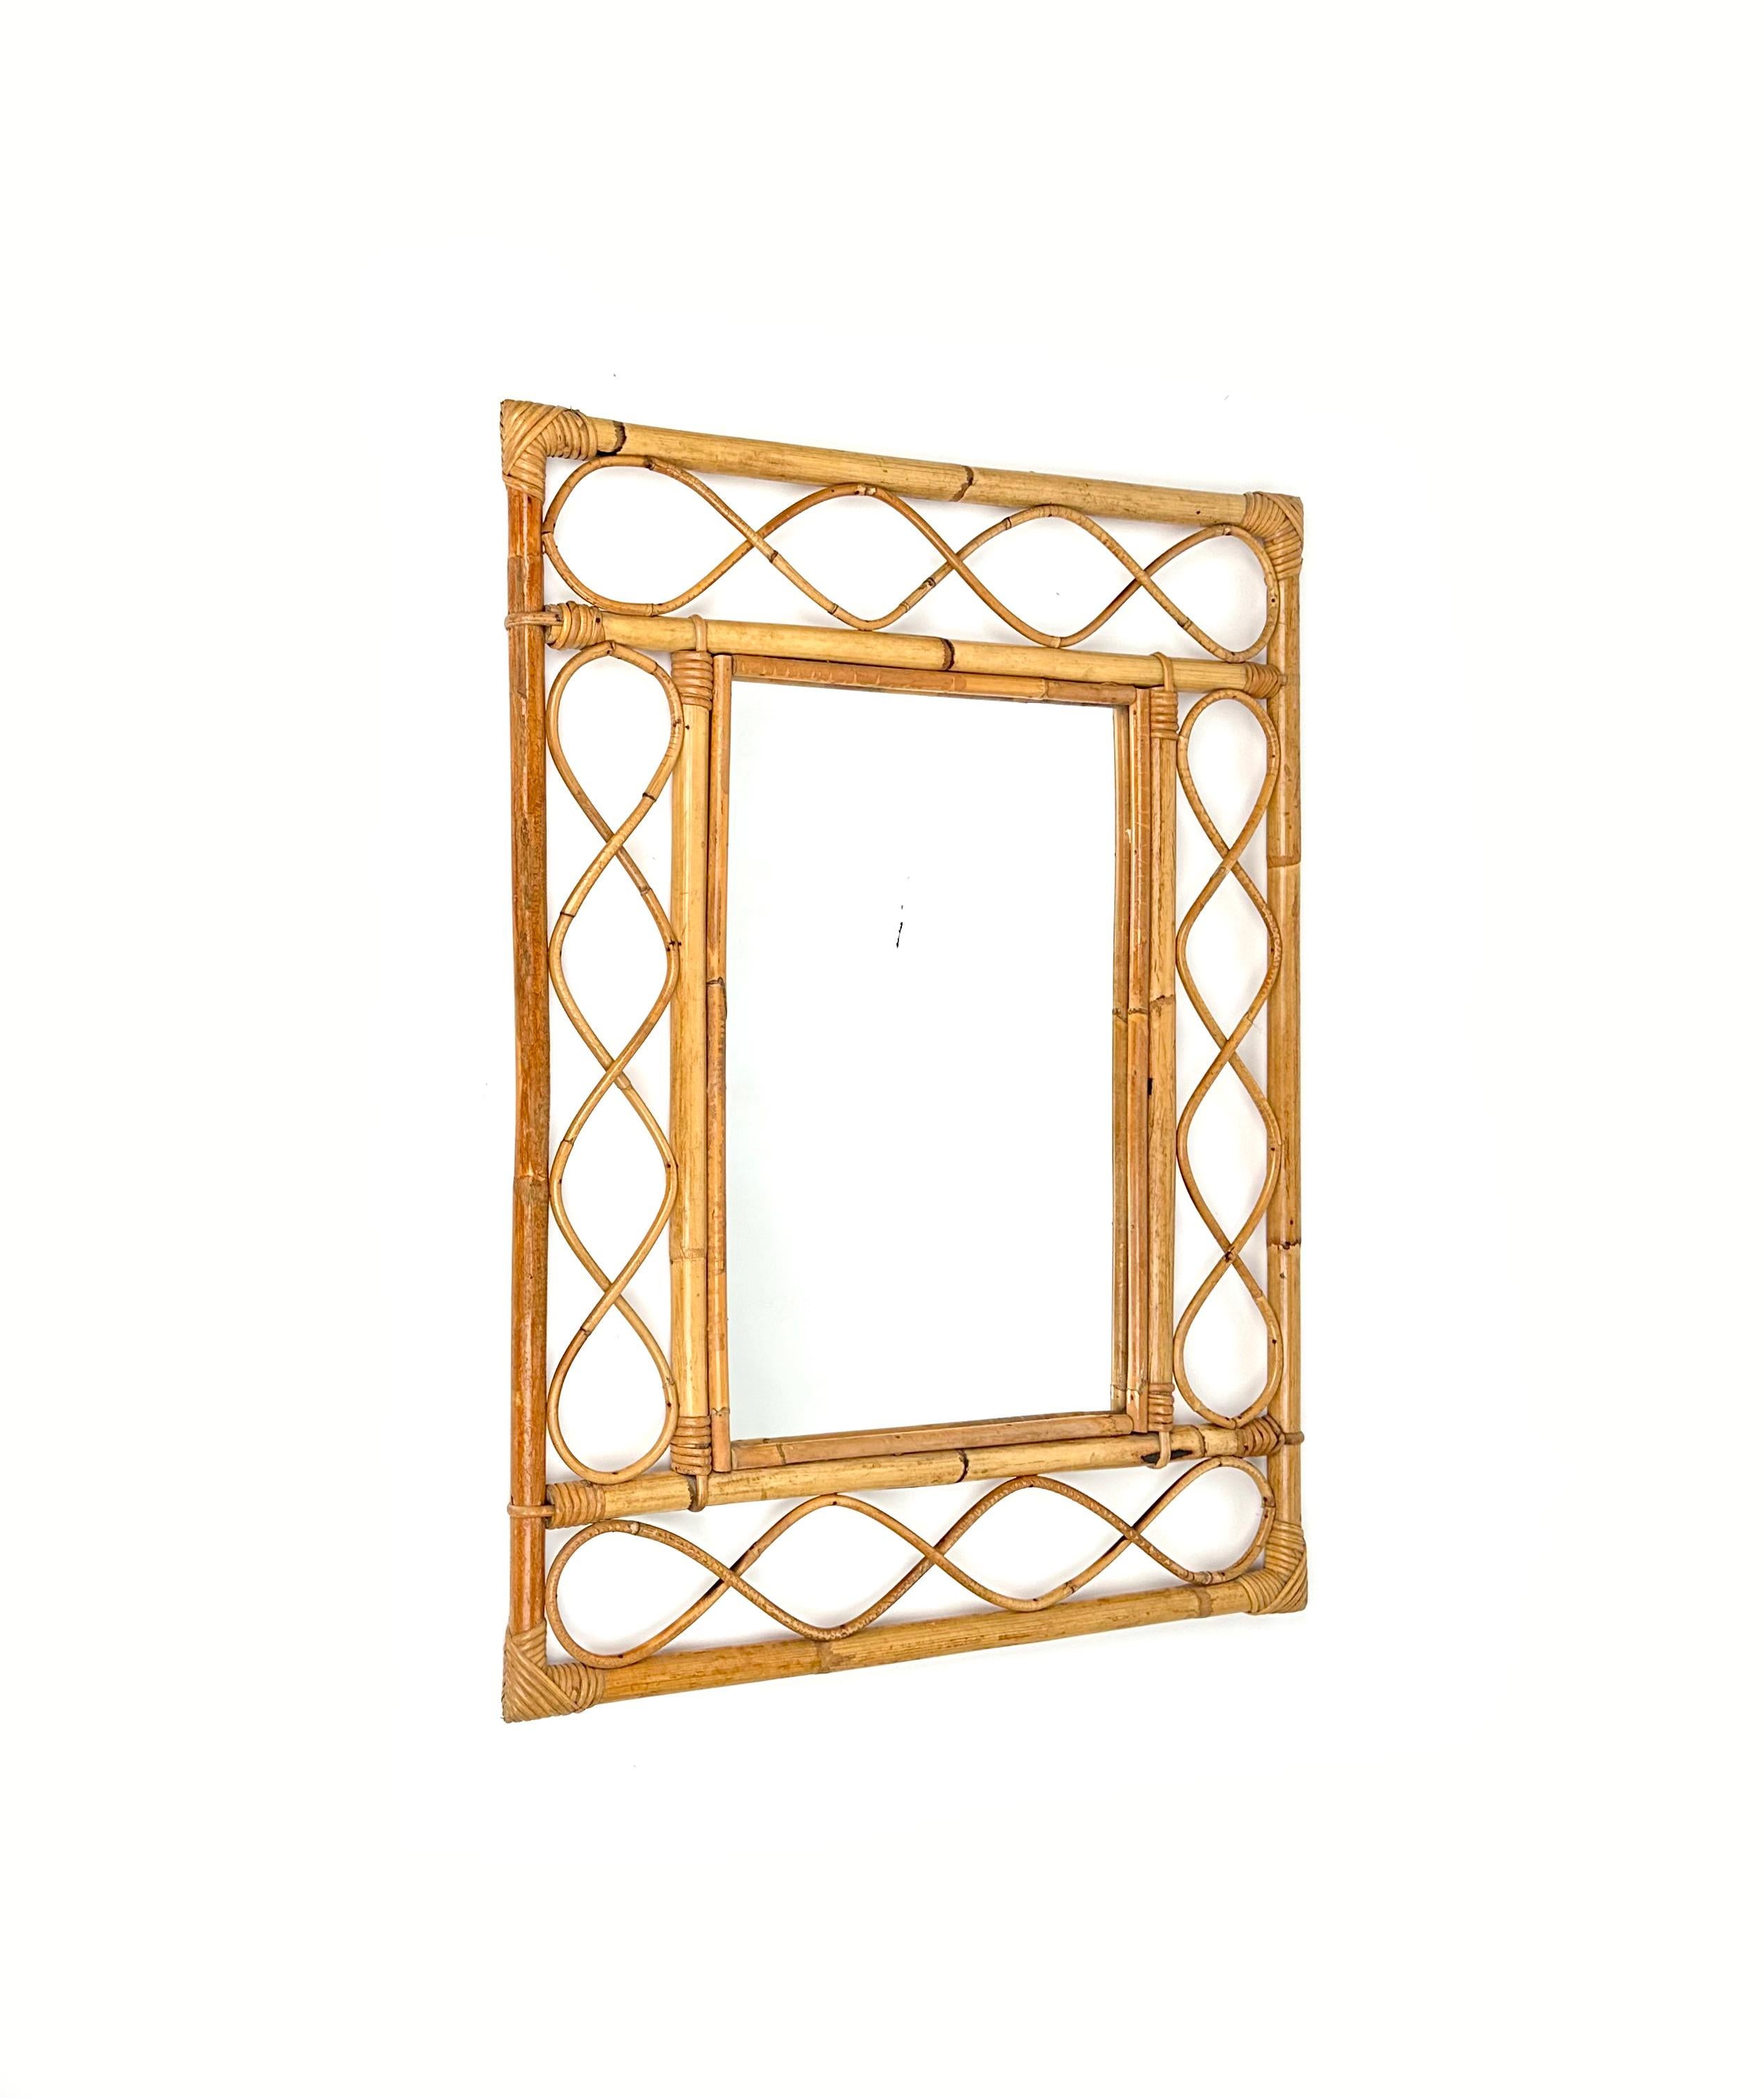 Midcentury Rectangular mirror in bamboo and rattan.

Made in Italy in the 1960s.

This is an Asian-inspired design with inner and outer frames connected by geometric shapes of rattan cane. The corners are lashed together and protected with